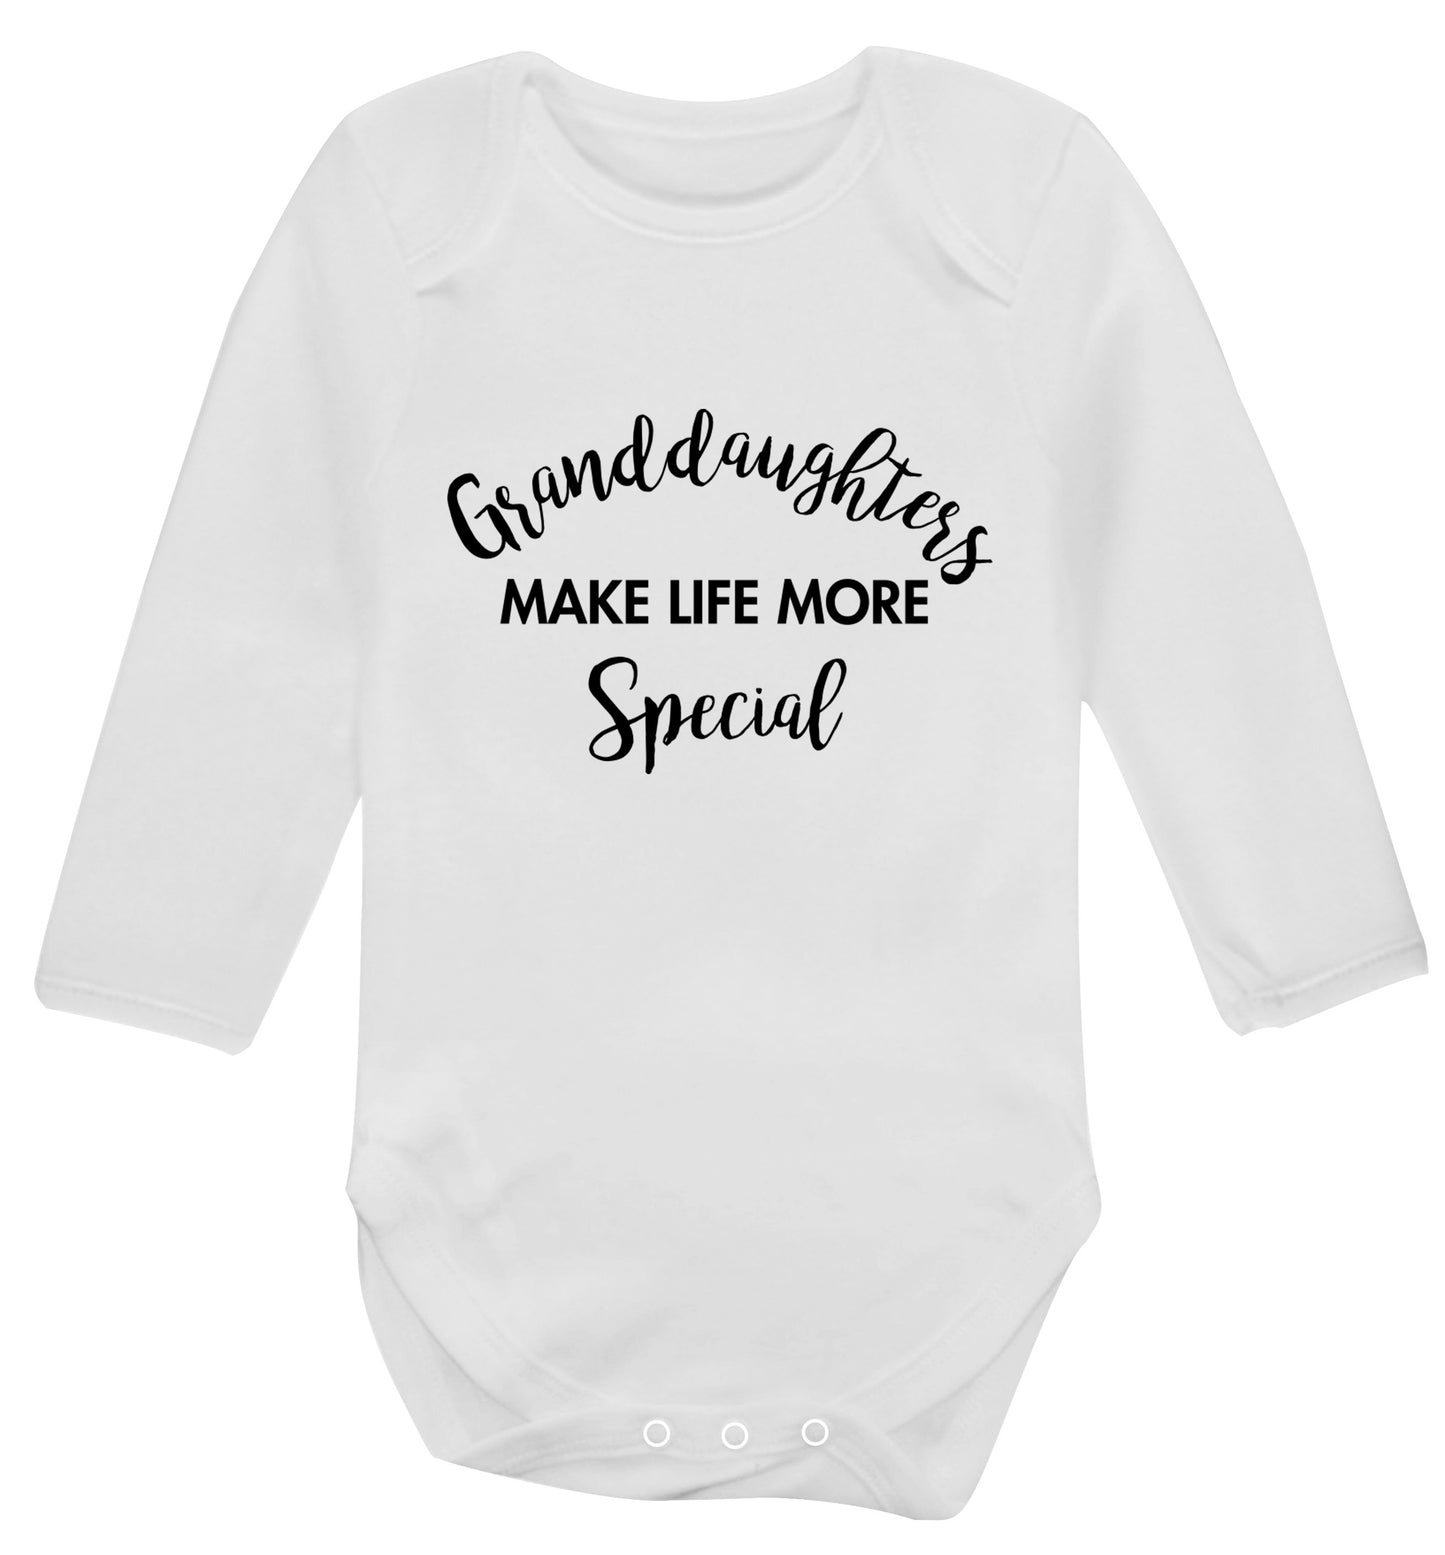 Granddaughters make life more special Baby Vest long sleeved white 6-12 months